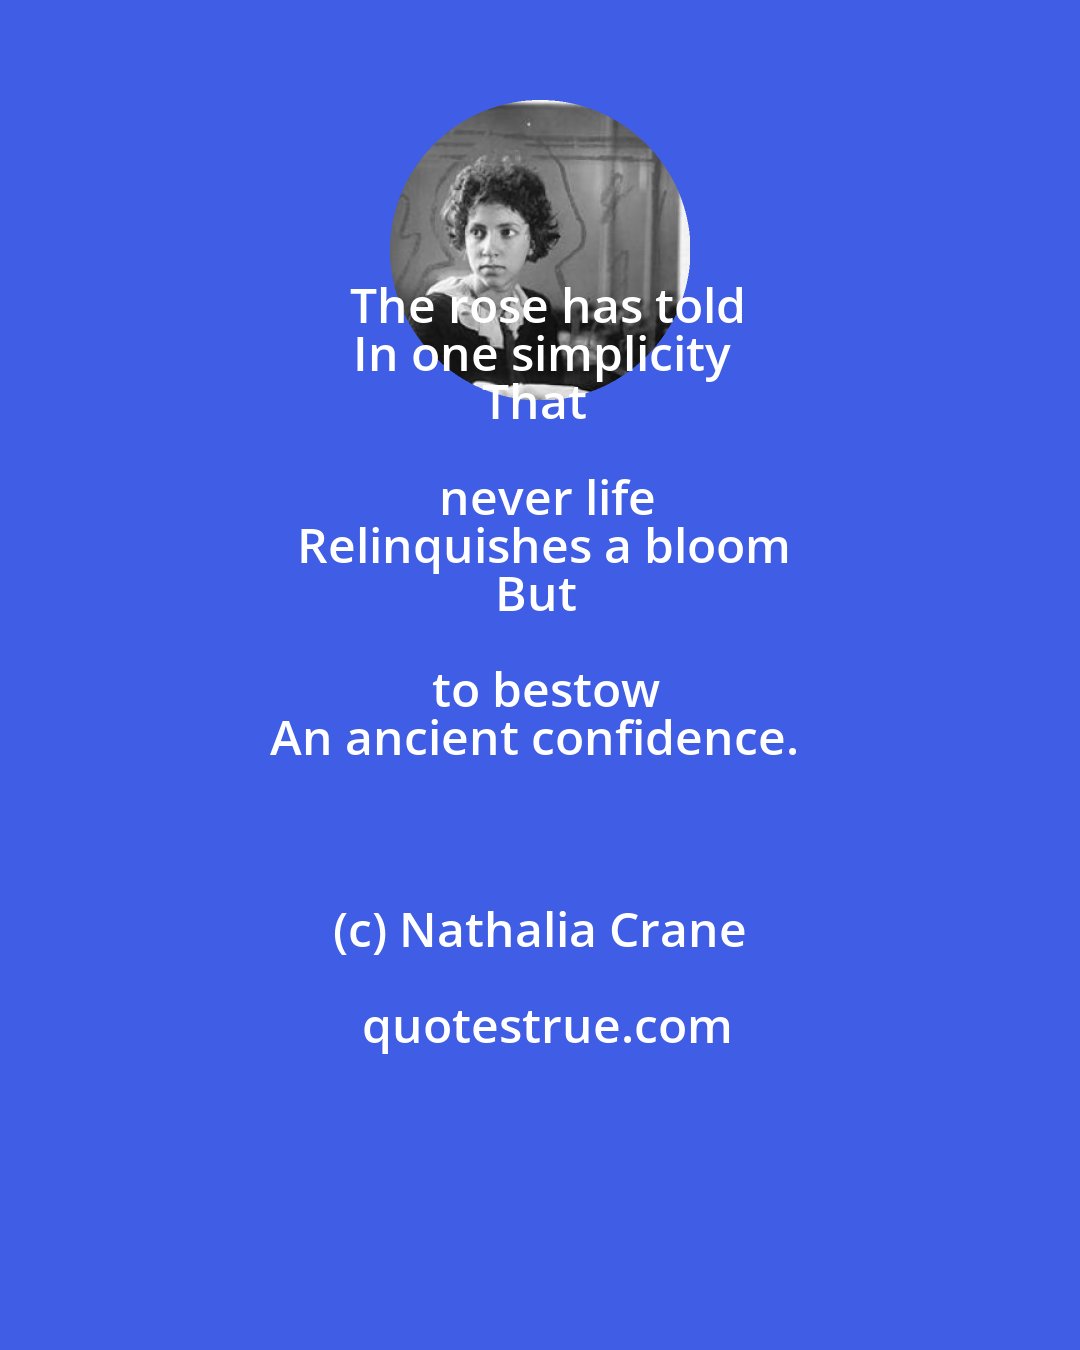 Nathalia Crane: The rose has told
In one simplicity
That never life
Relinquishes a bloom
But to bestow
An ancient confidence.